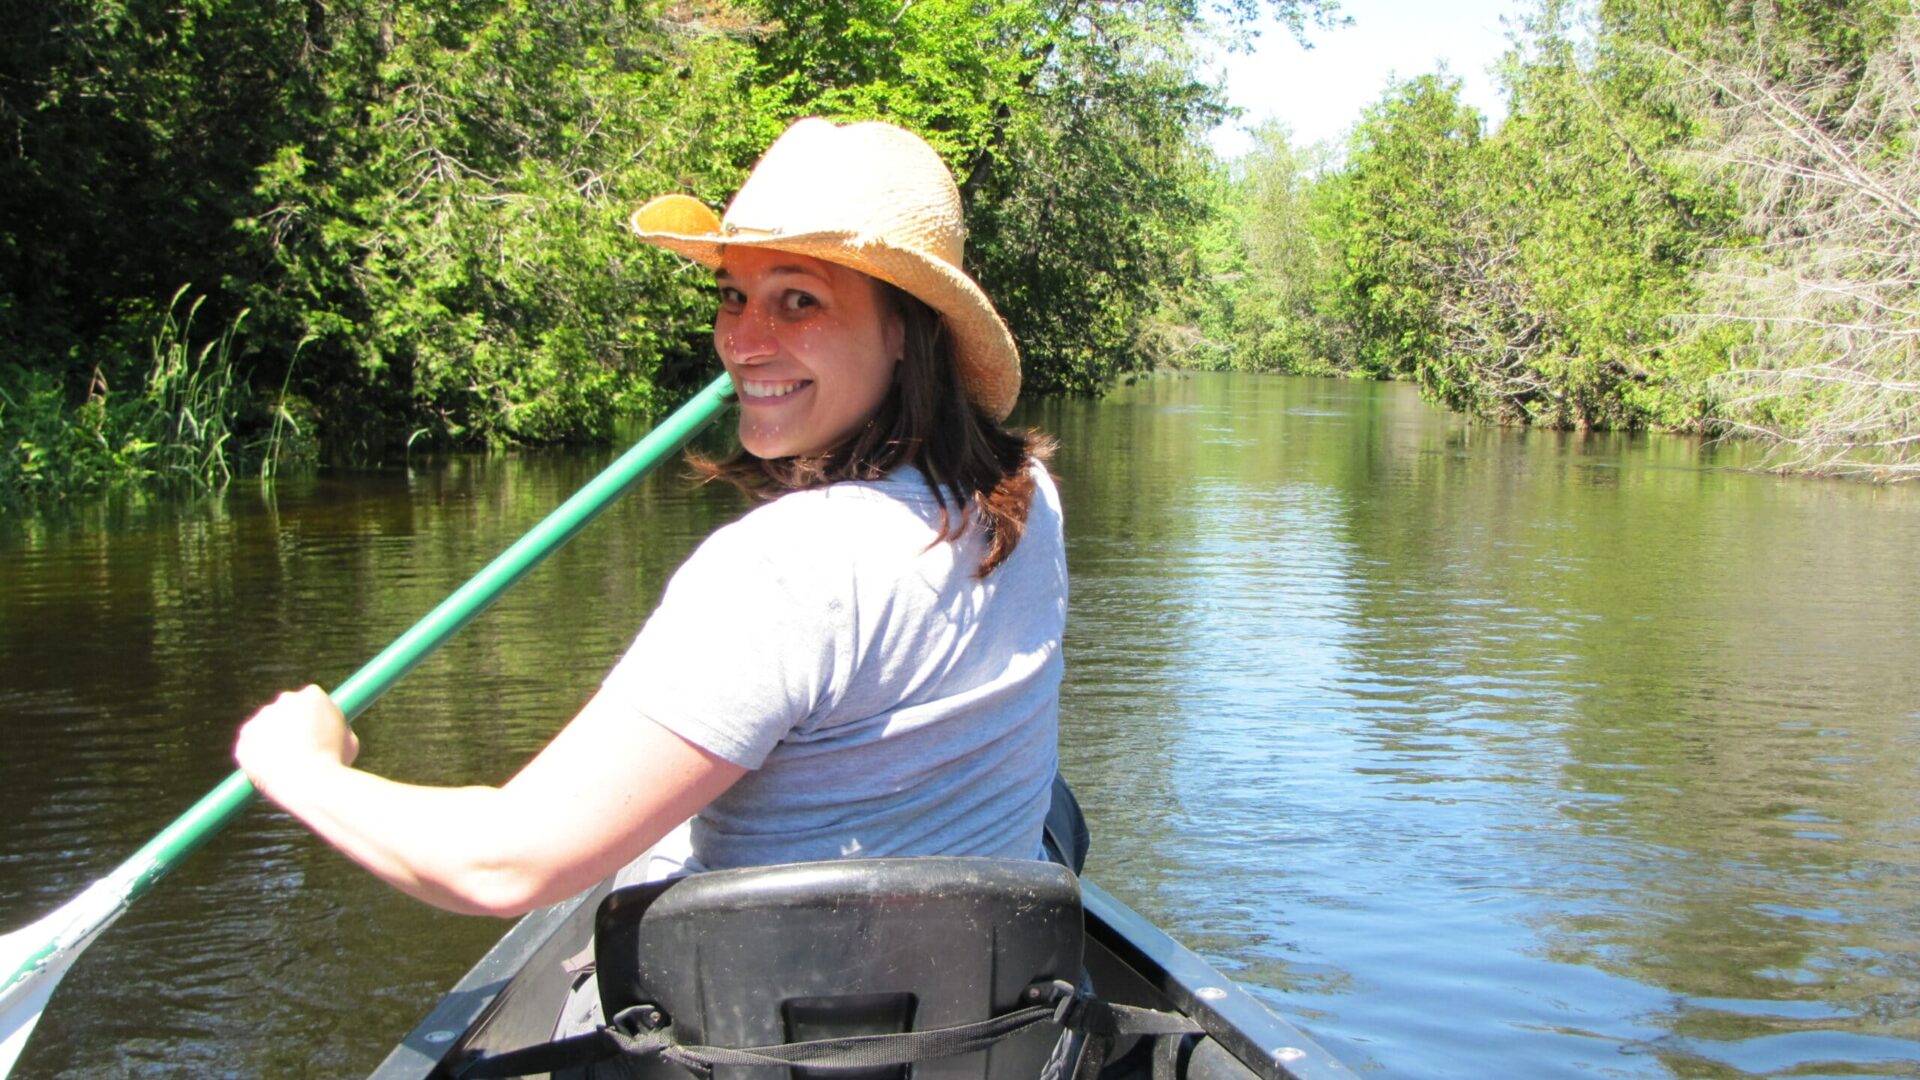 smiling young gal paddling a canoe on a serene river